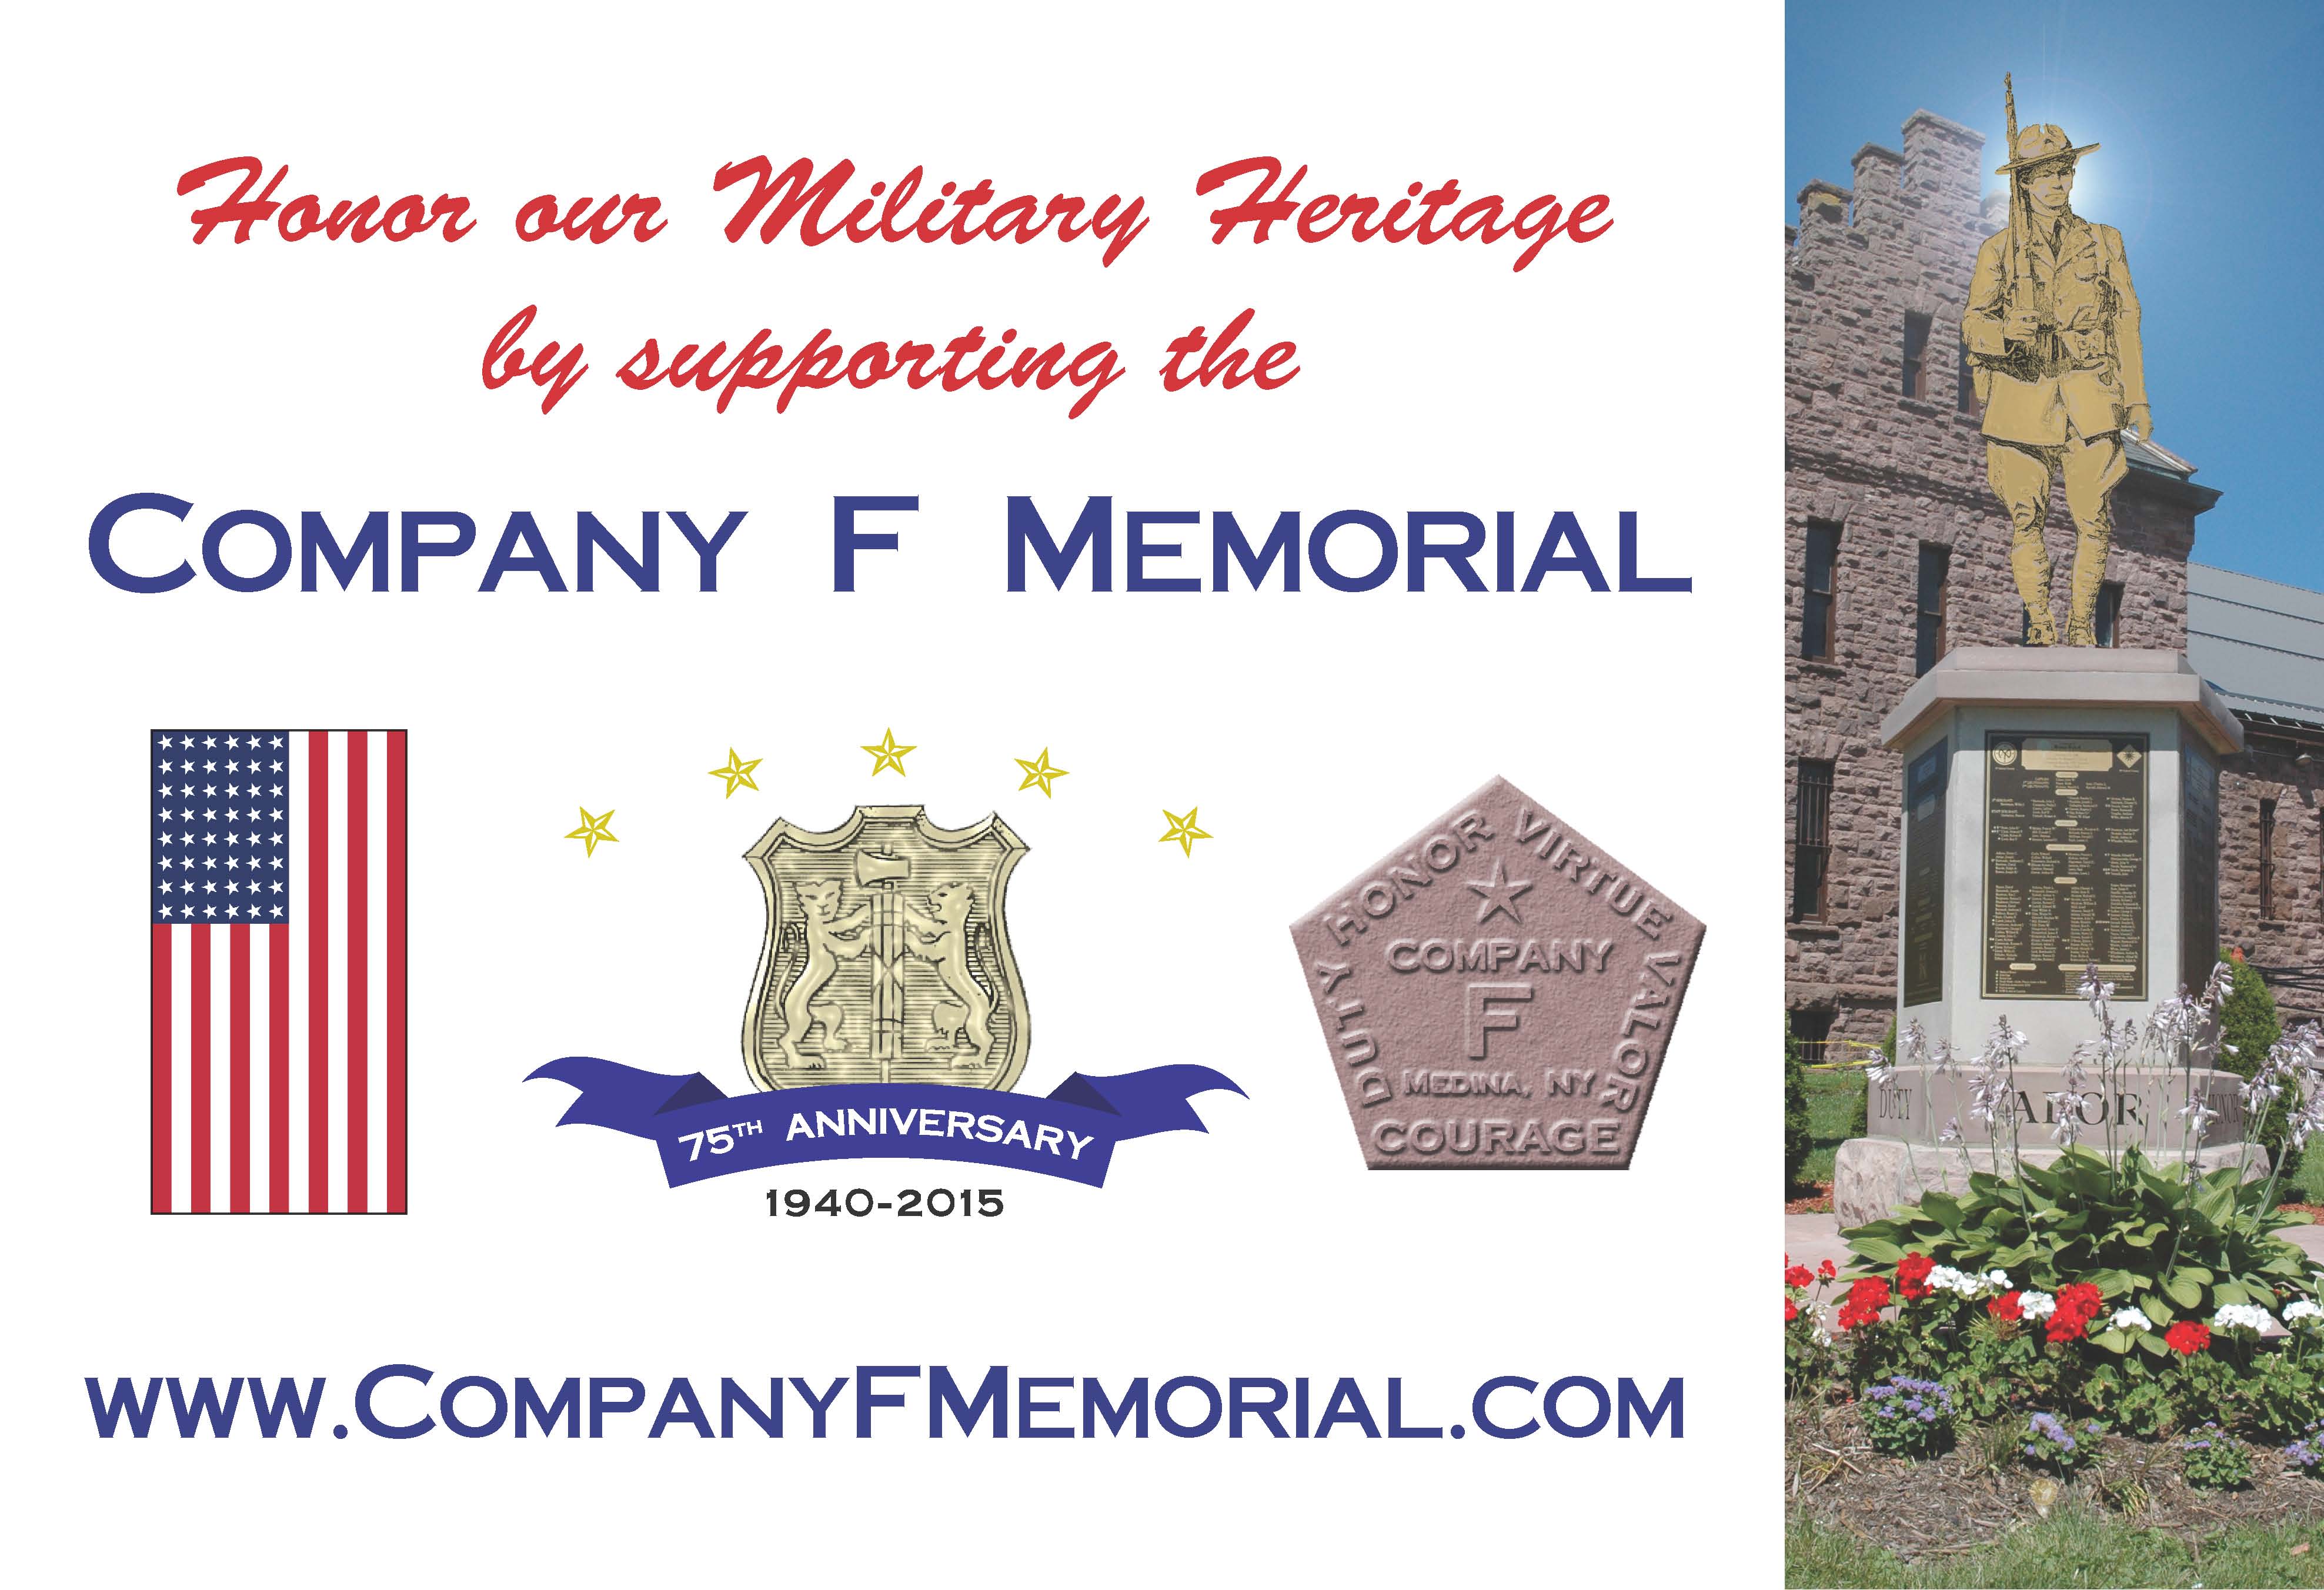 Honor our Military Heritage by supporting the Company F Memorial